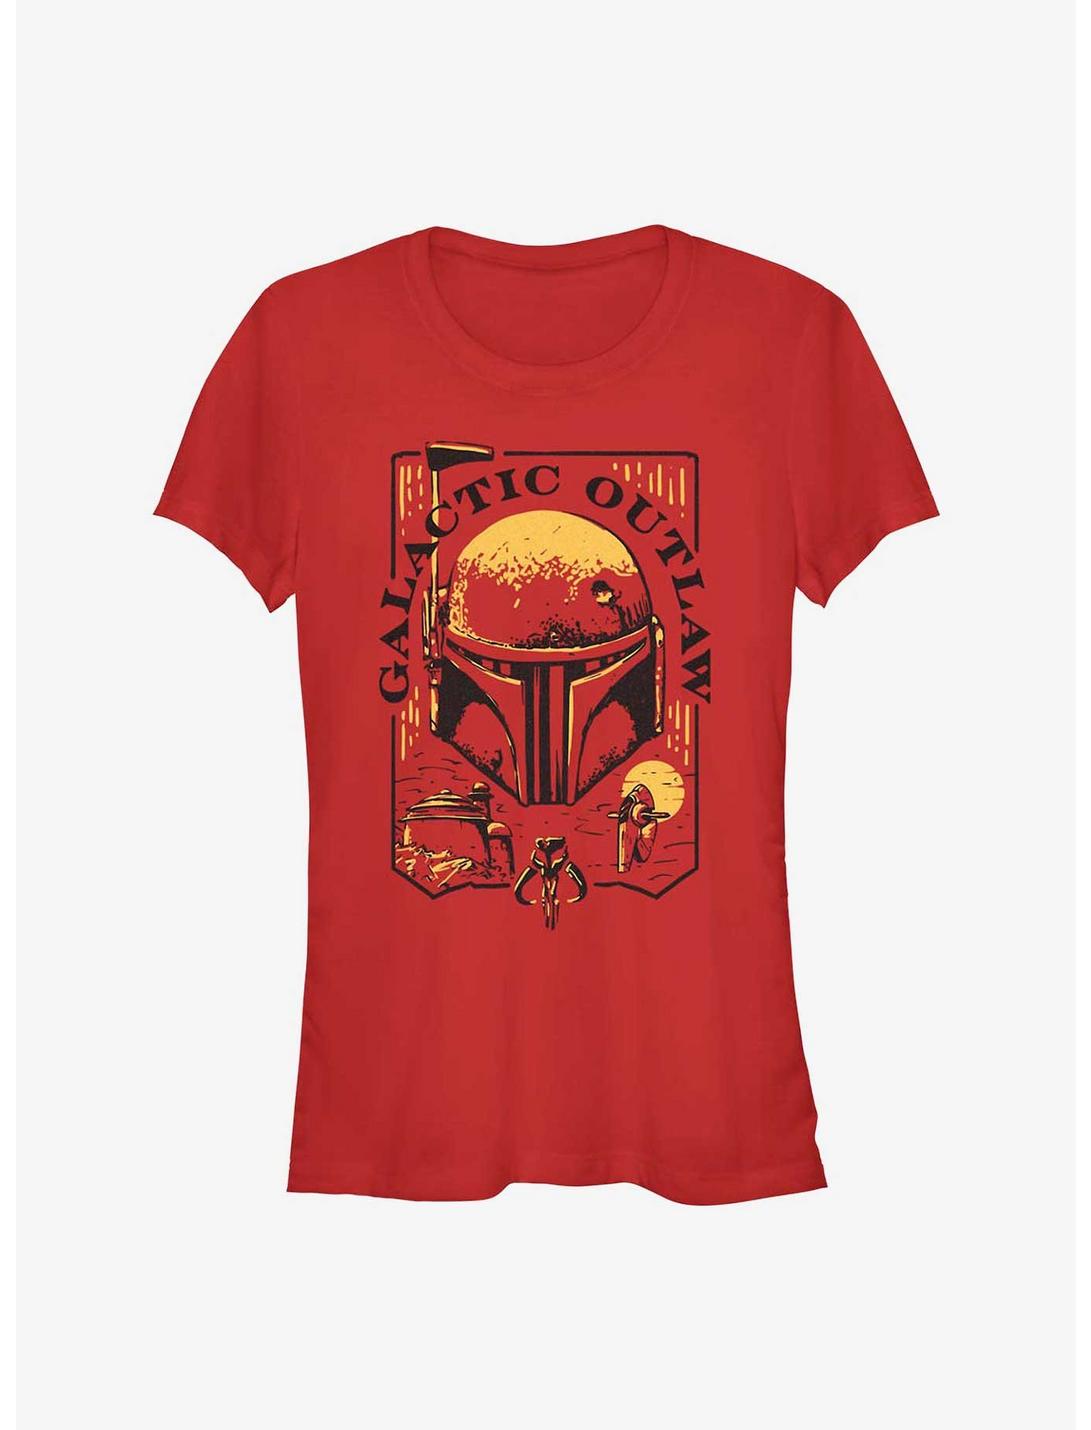 Star Wars The Book Of Boba Fett Galactic Outlaw Logo Girls T-Shirt, RED, hi-res